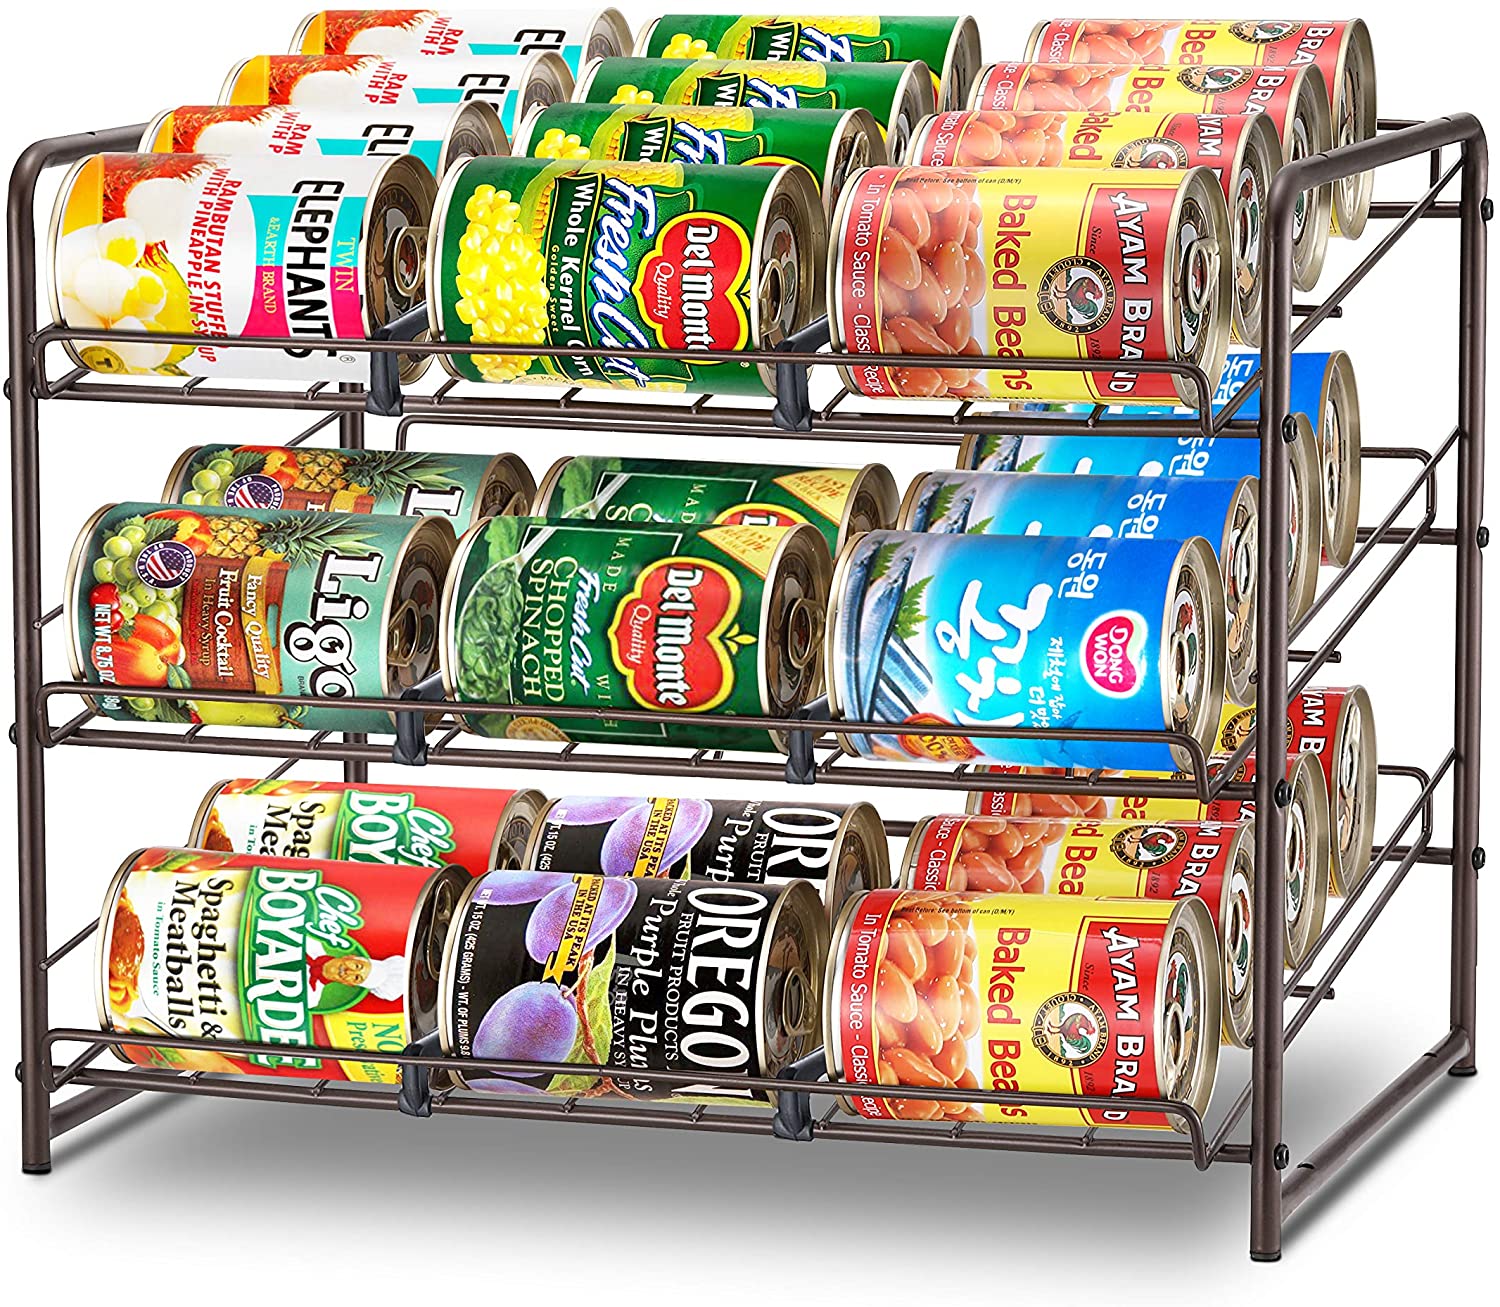 https://discounttoday.net/wp-content/uploads/2022/01/Simple-Trending-Can-Rack-Organizer-Stackable-Can-Storage-Dispenser-Holds-up-to-36-Cans-for-Kitchen-Cabinet-or-Pantry-Bronze.jpg